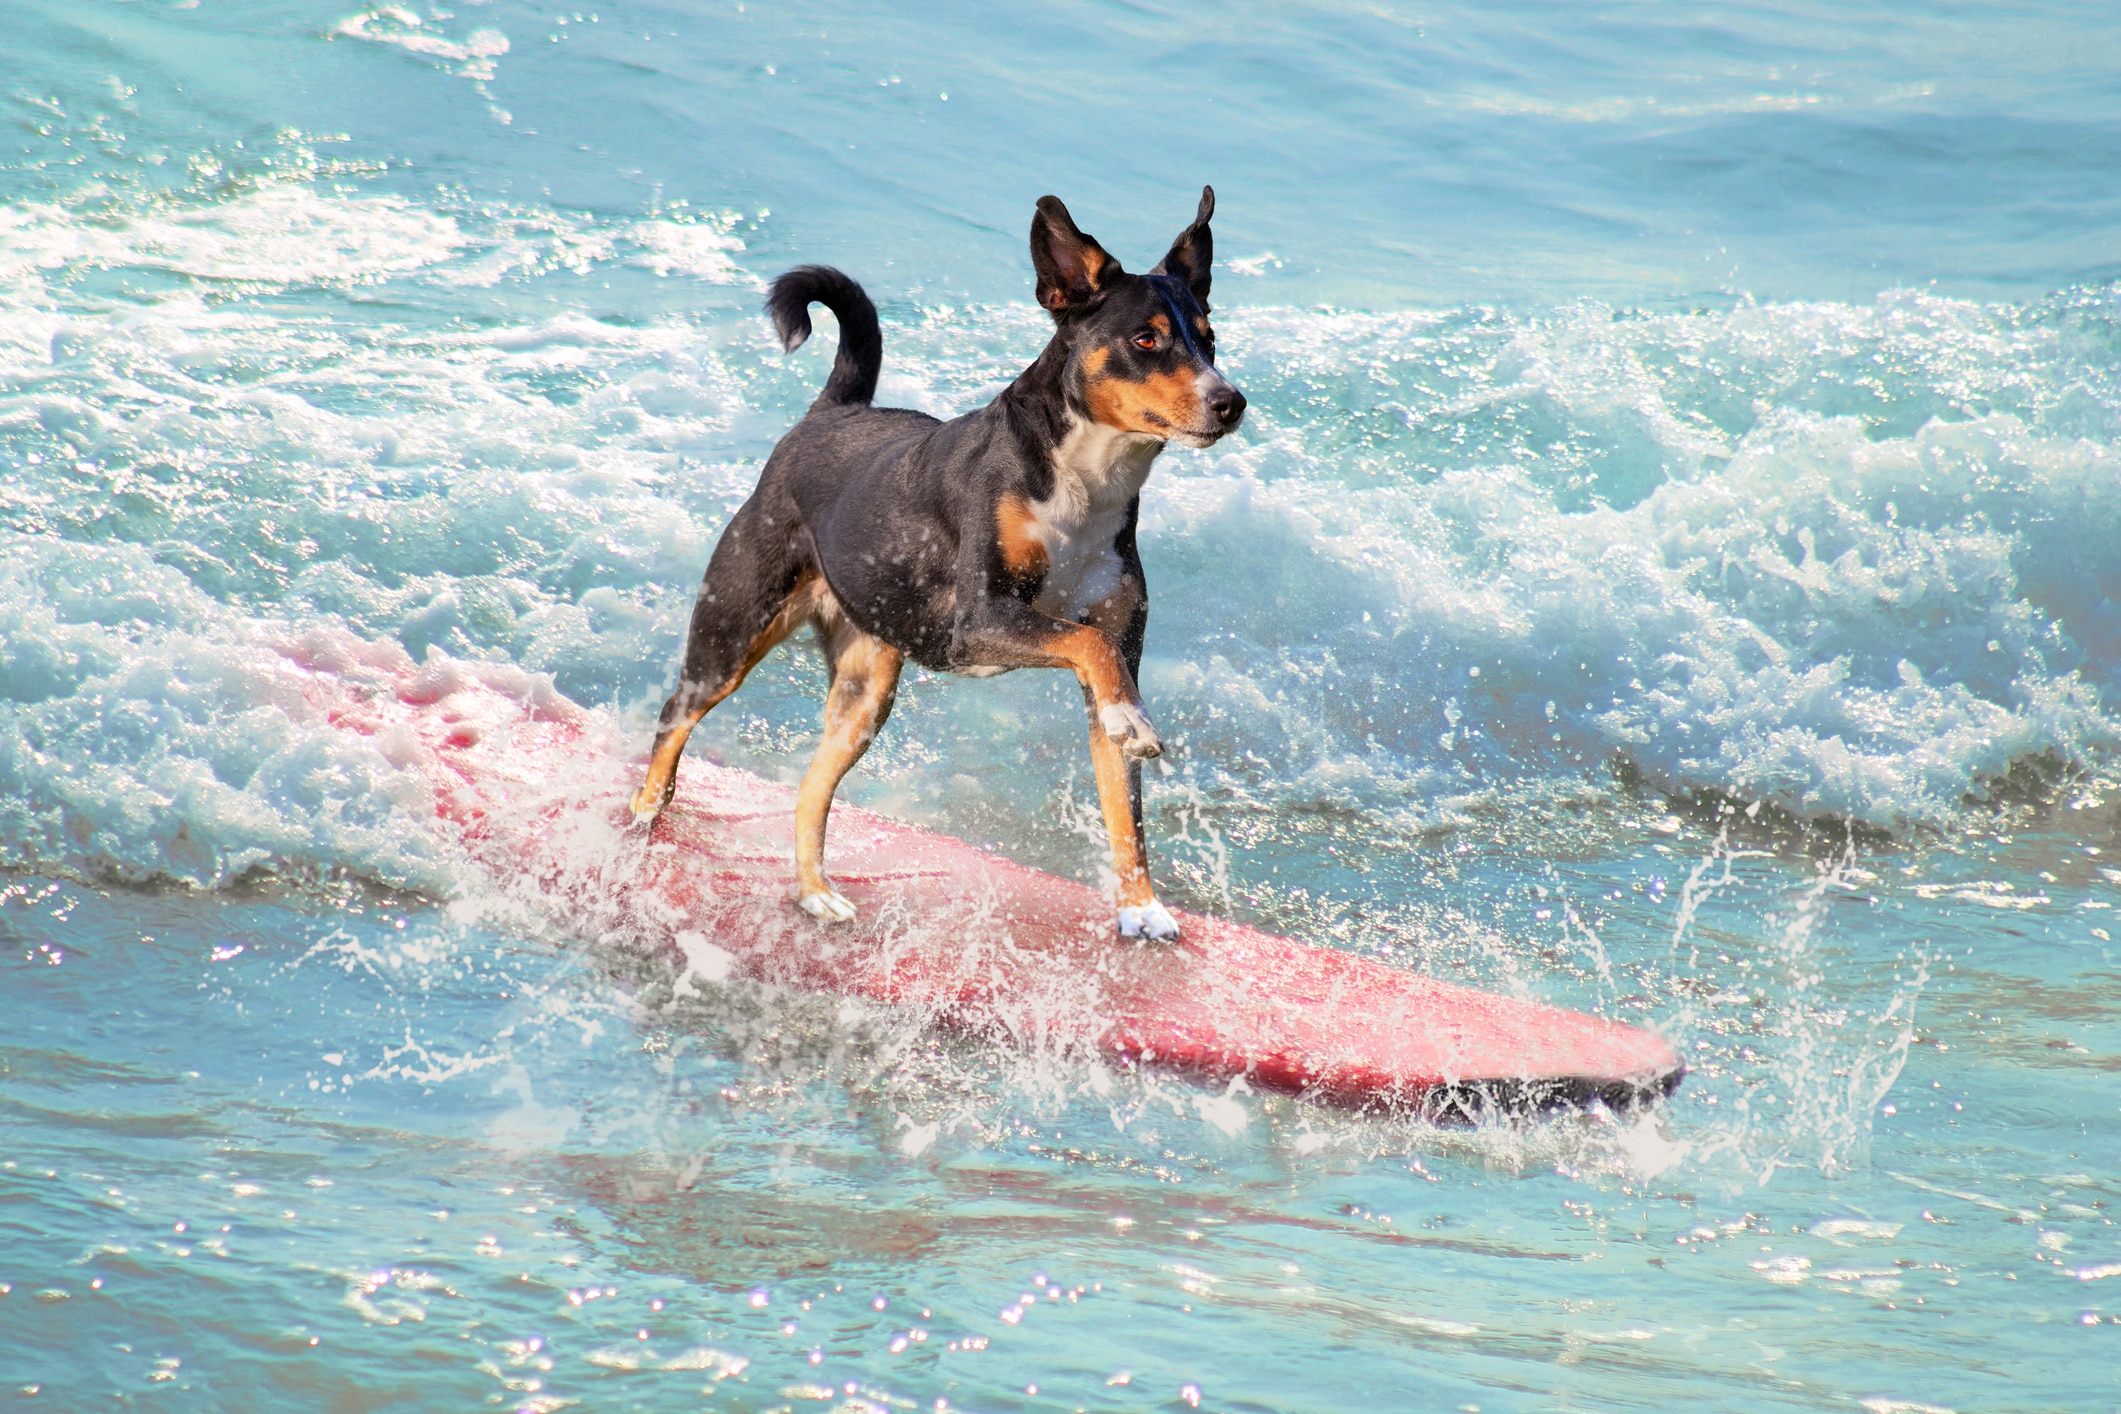 A mixed breed pup surfs on a board.